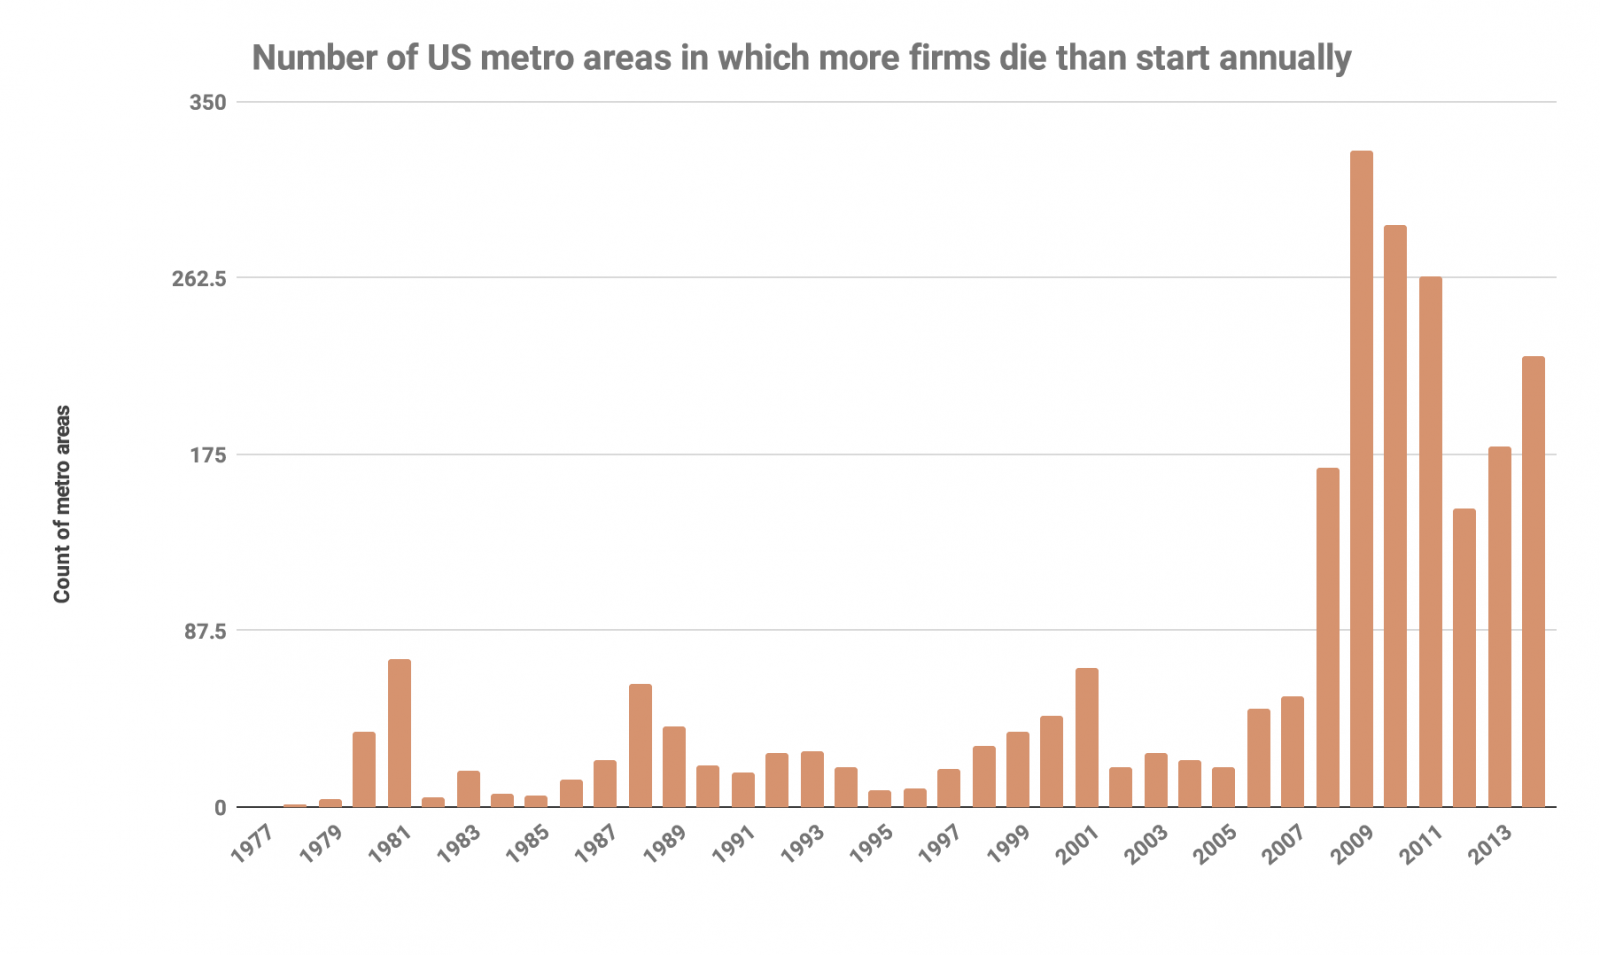 Bar graph showing the number of US metro areas in which more firms die than start annually, with count of metro areas on the y-axis and year on the x-axis.